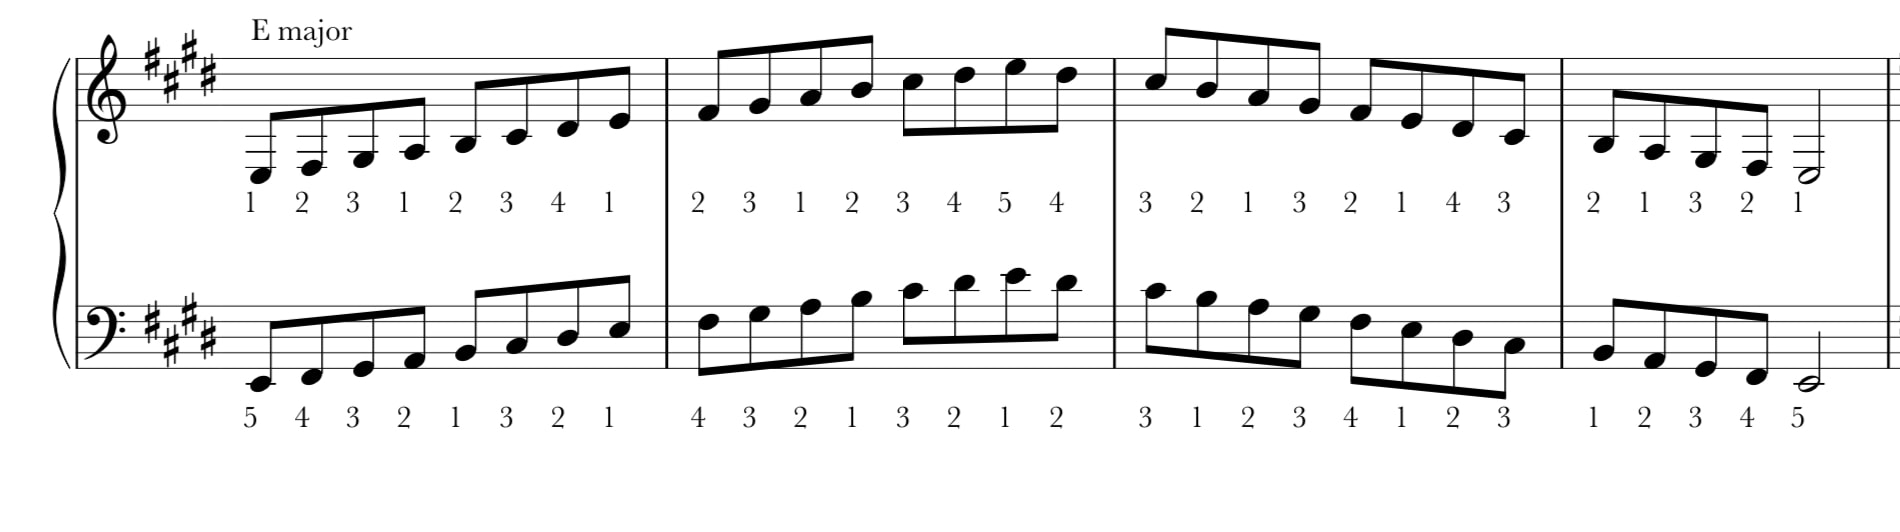 Notation for two octaves of E major scale on piano including finger numbers